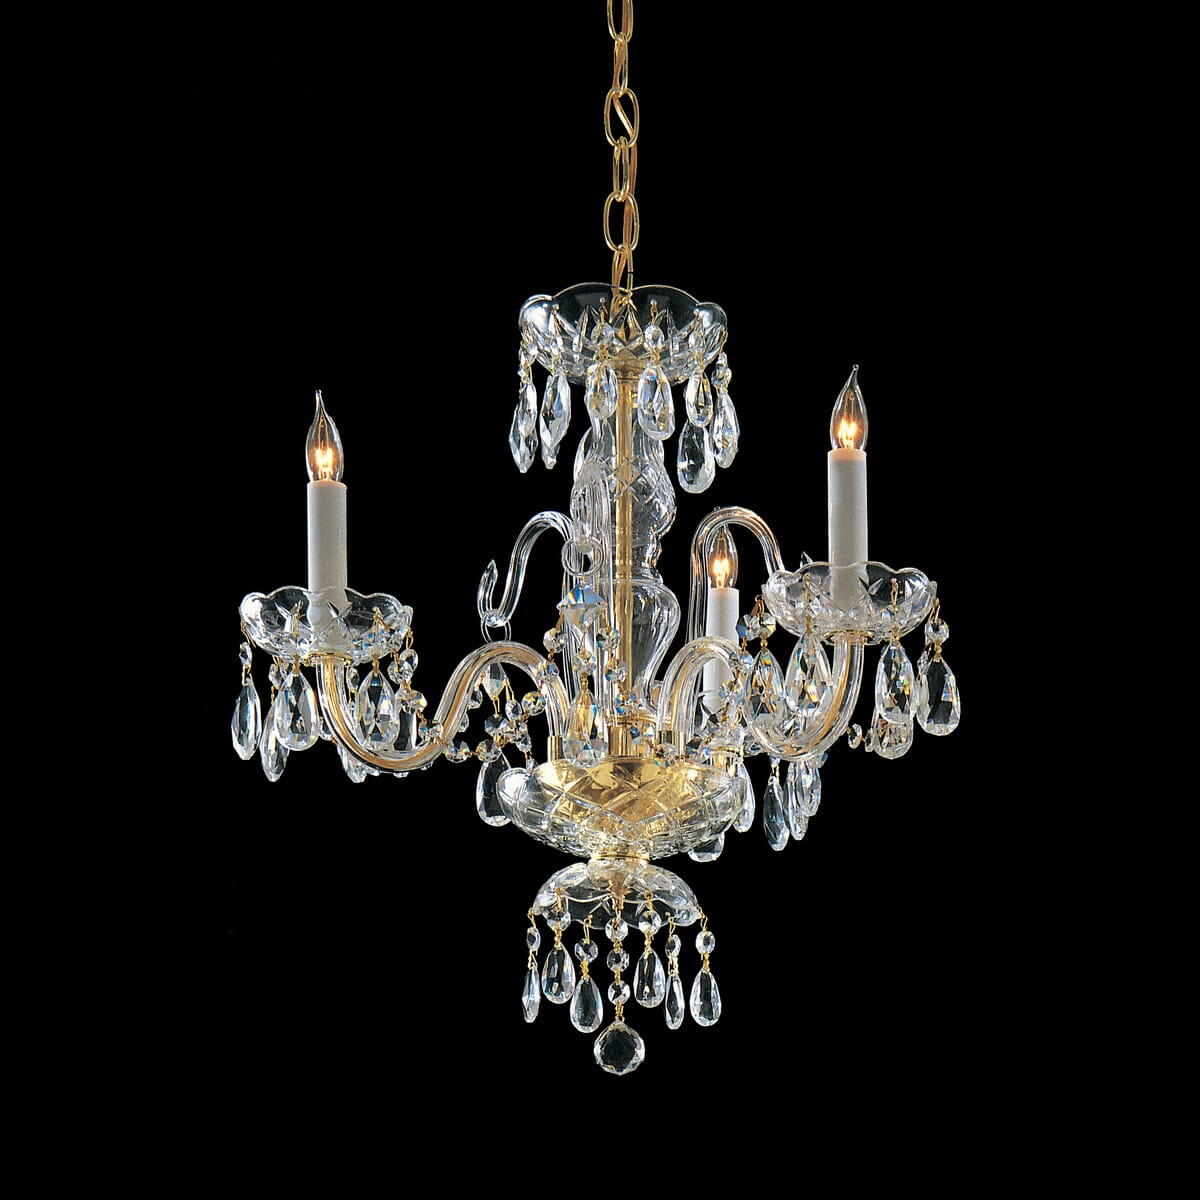 Traditional Crystal 3-Light 18"" Mini Chandelier in Polished Brass with Clear Hand Cut Crystals -  Crystorama, 5044-PB-CL-MWP